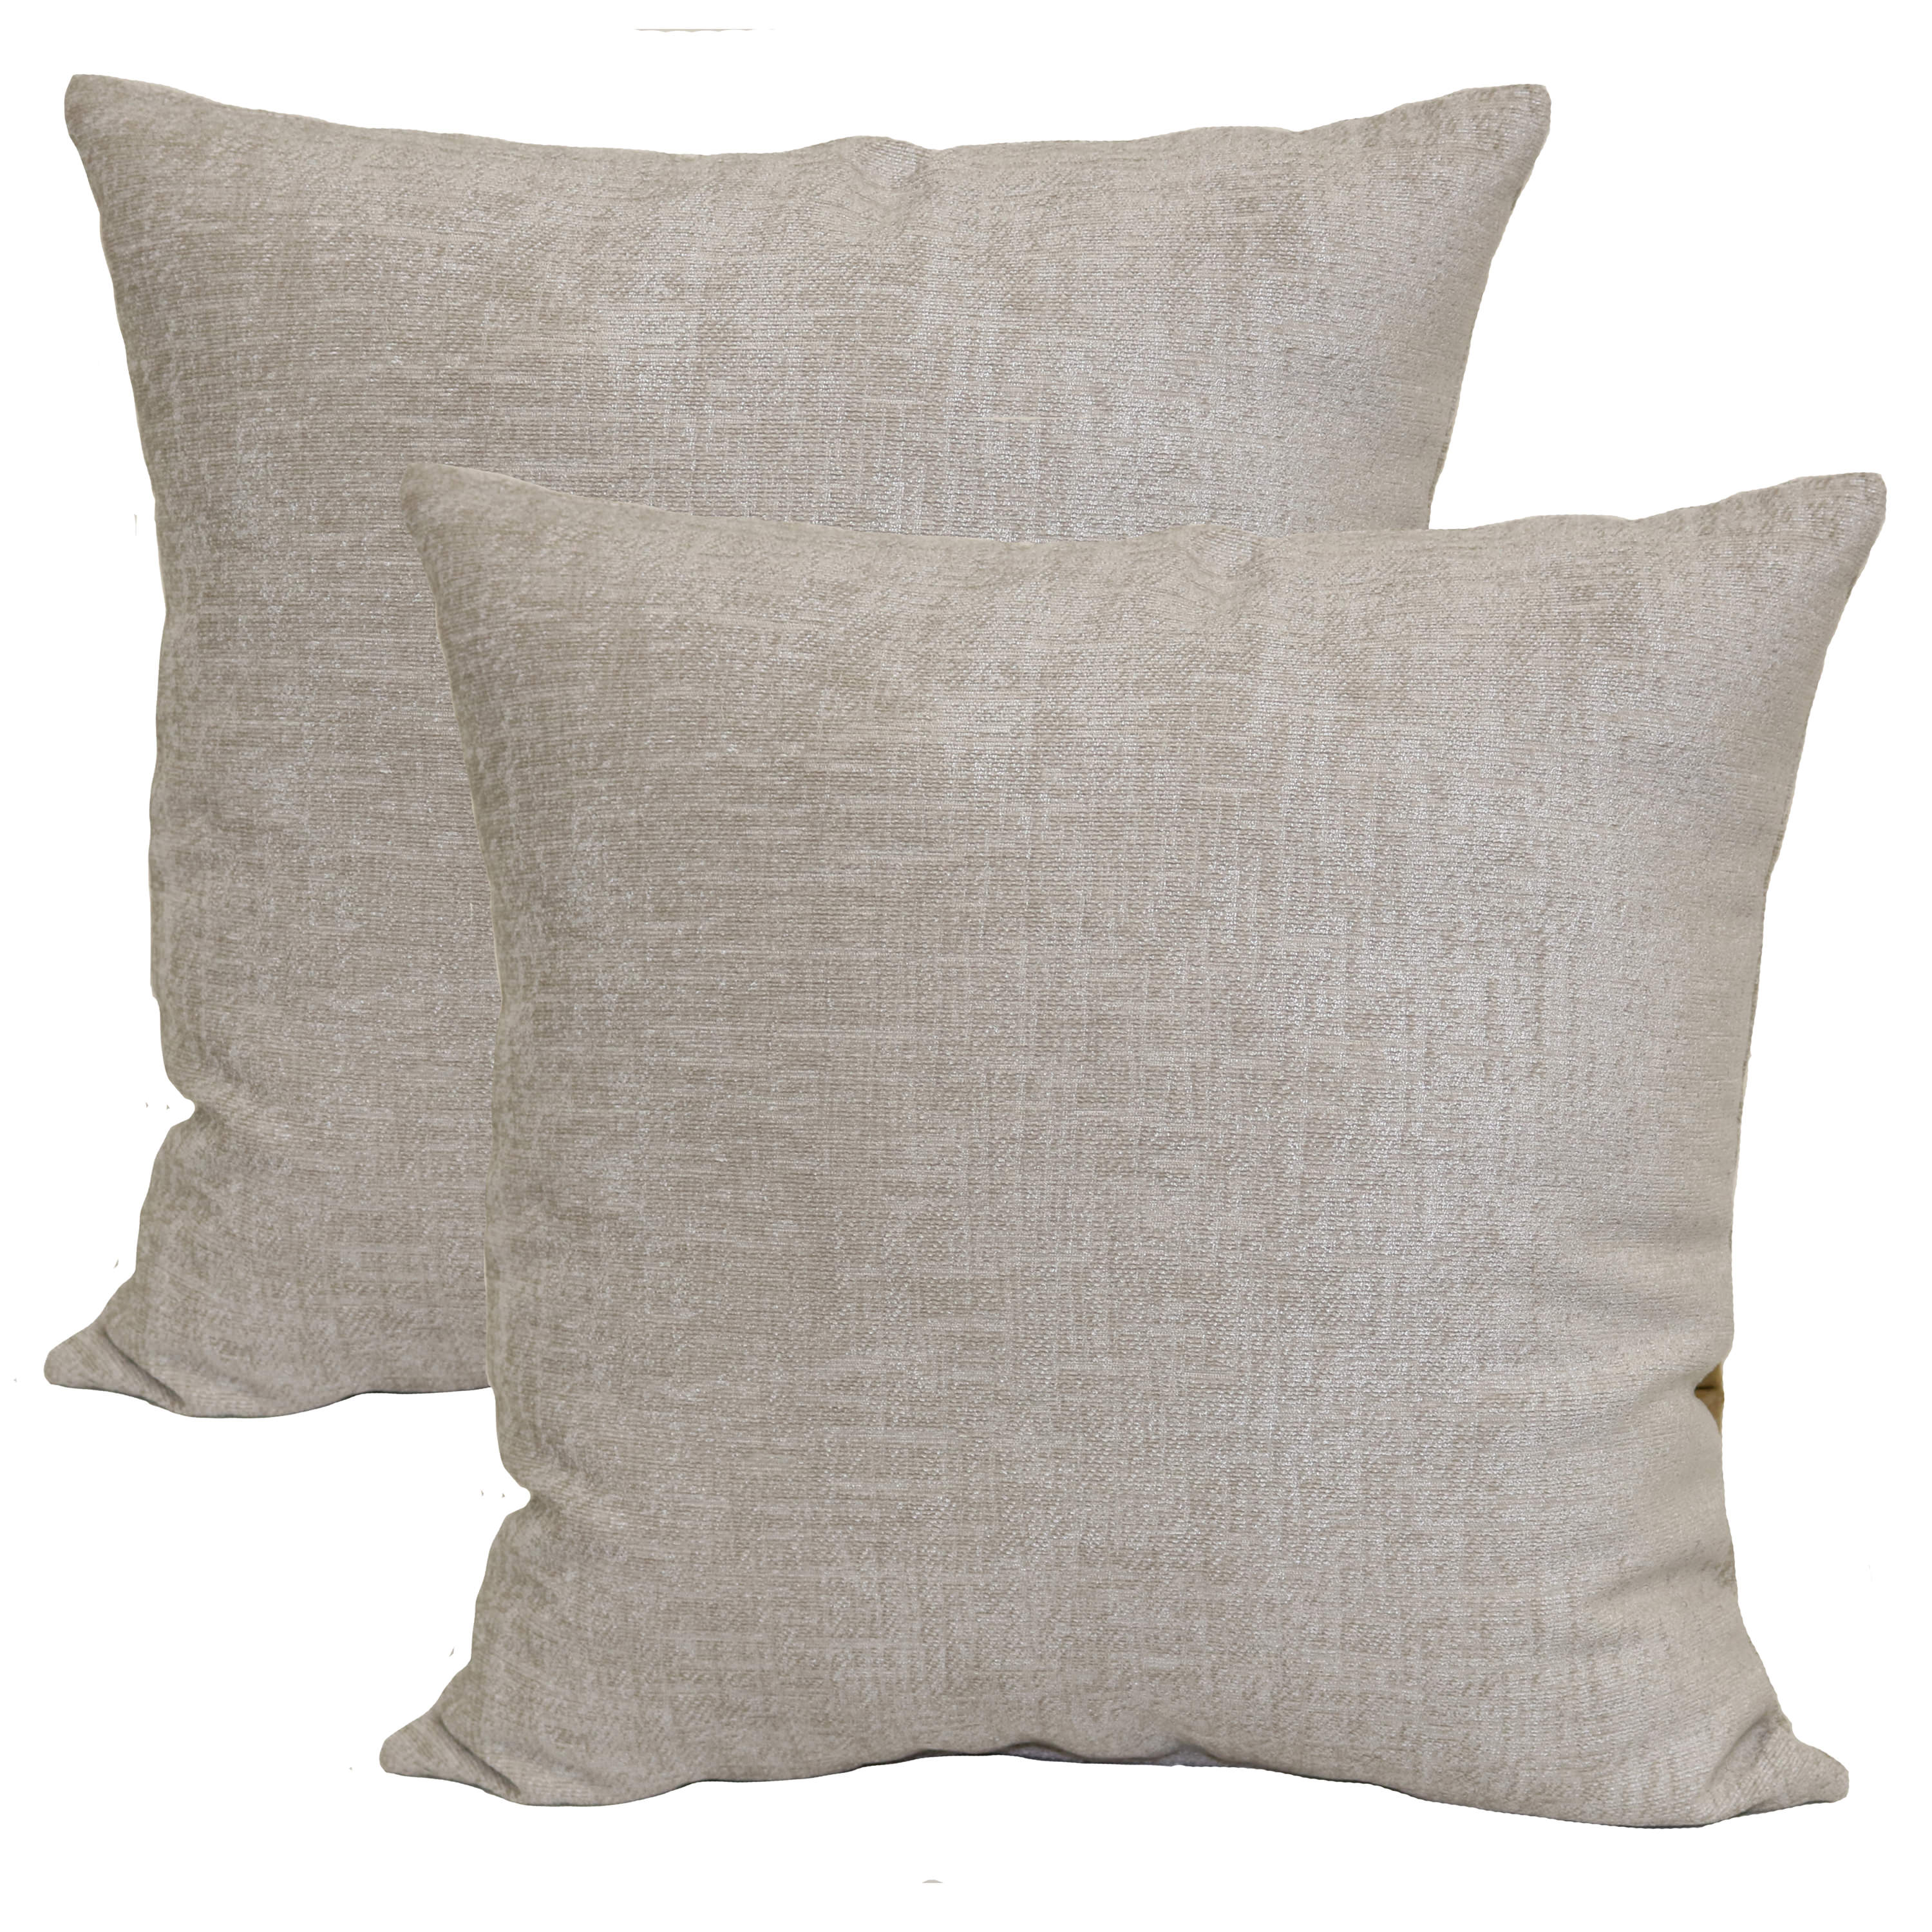 Mainstays Chenille Decorative Square Throw Pillow, 18" x 18", Gray Pumice, 2 Pack - image 1 of 5